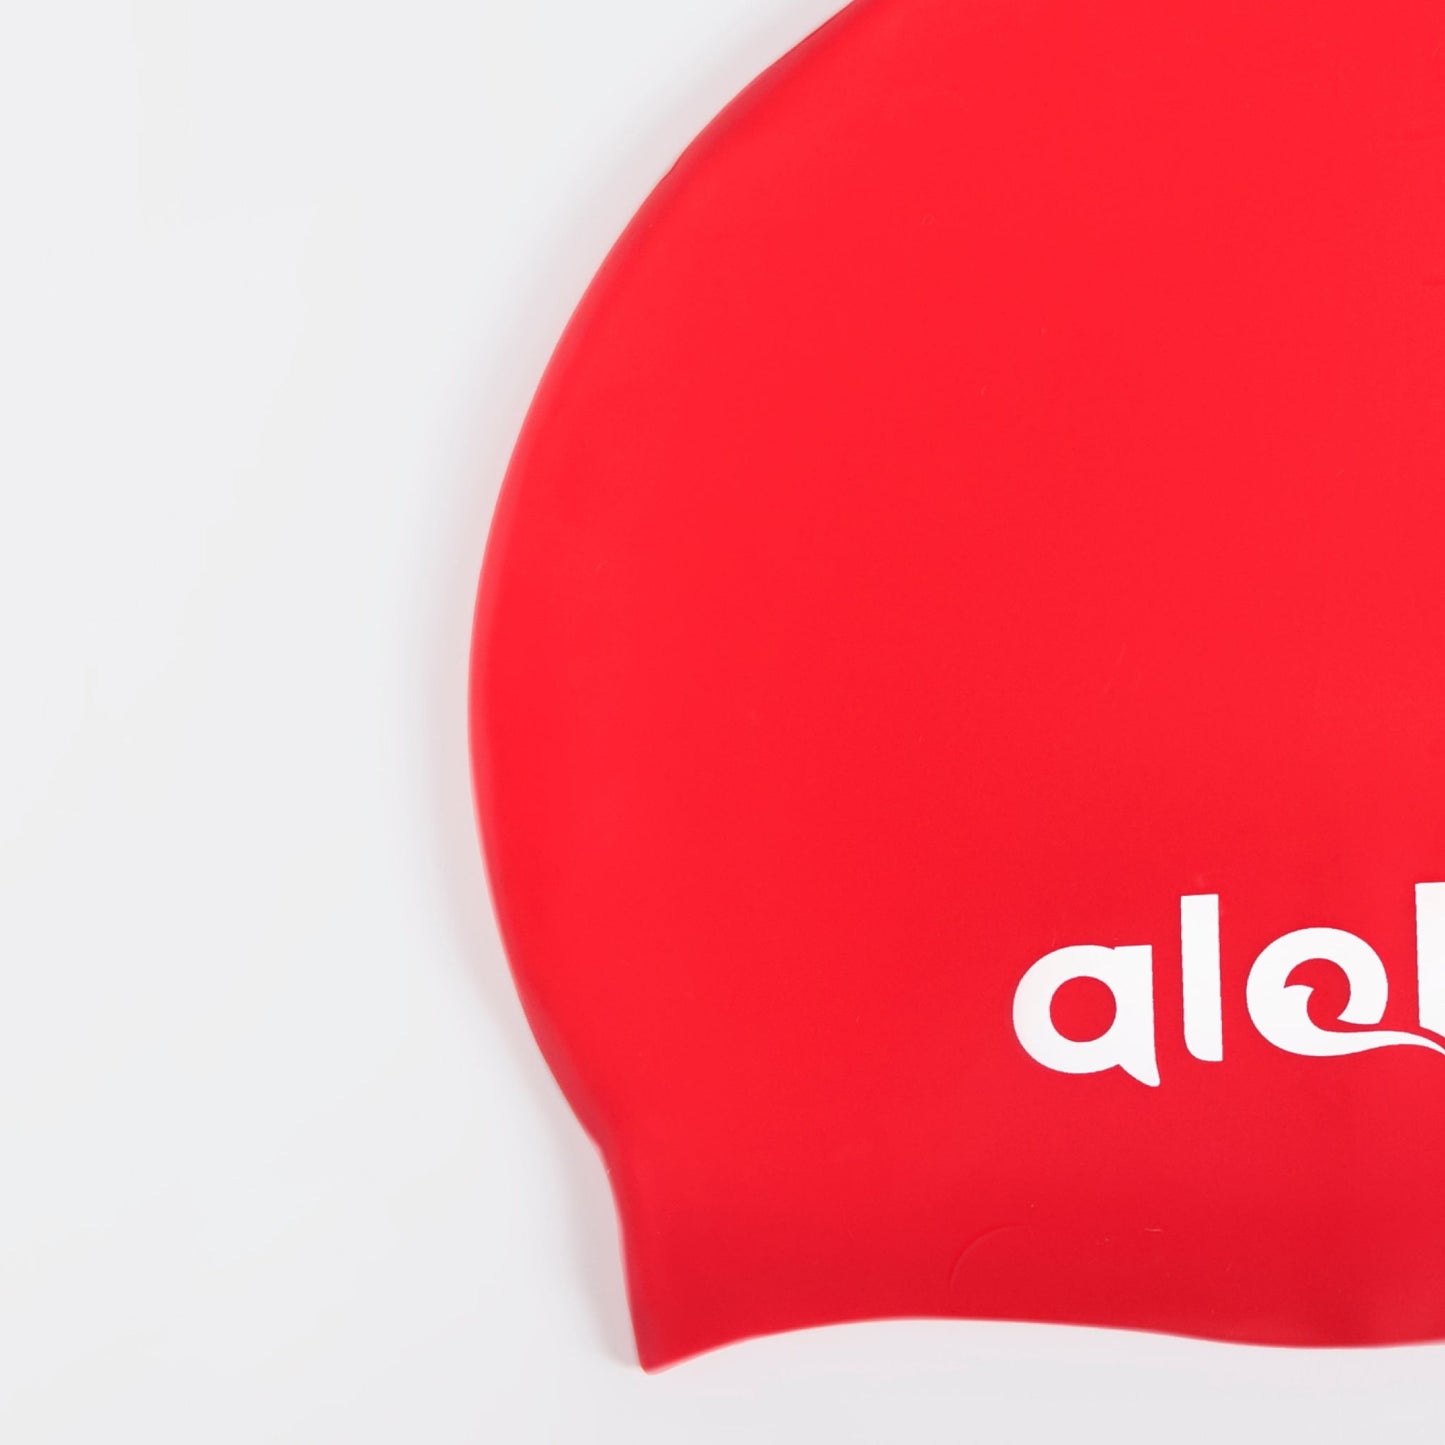 Aloha Adult Plain Moulded Silicone Cap Red